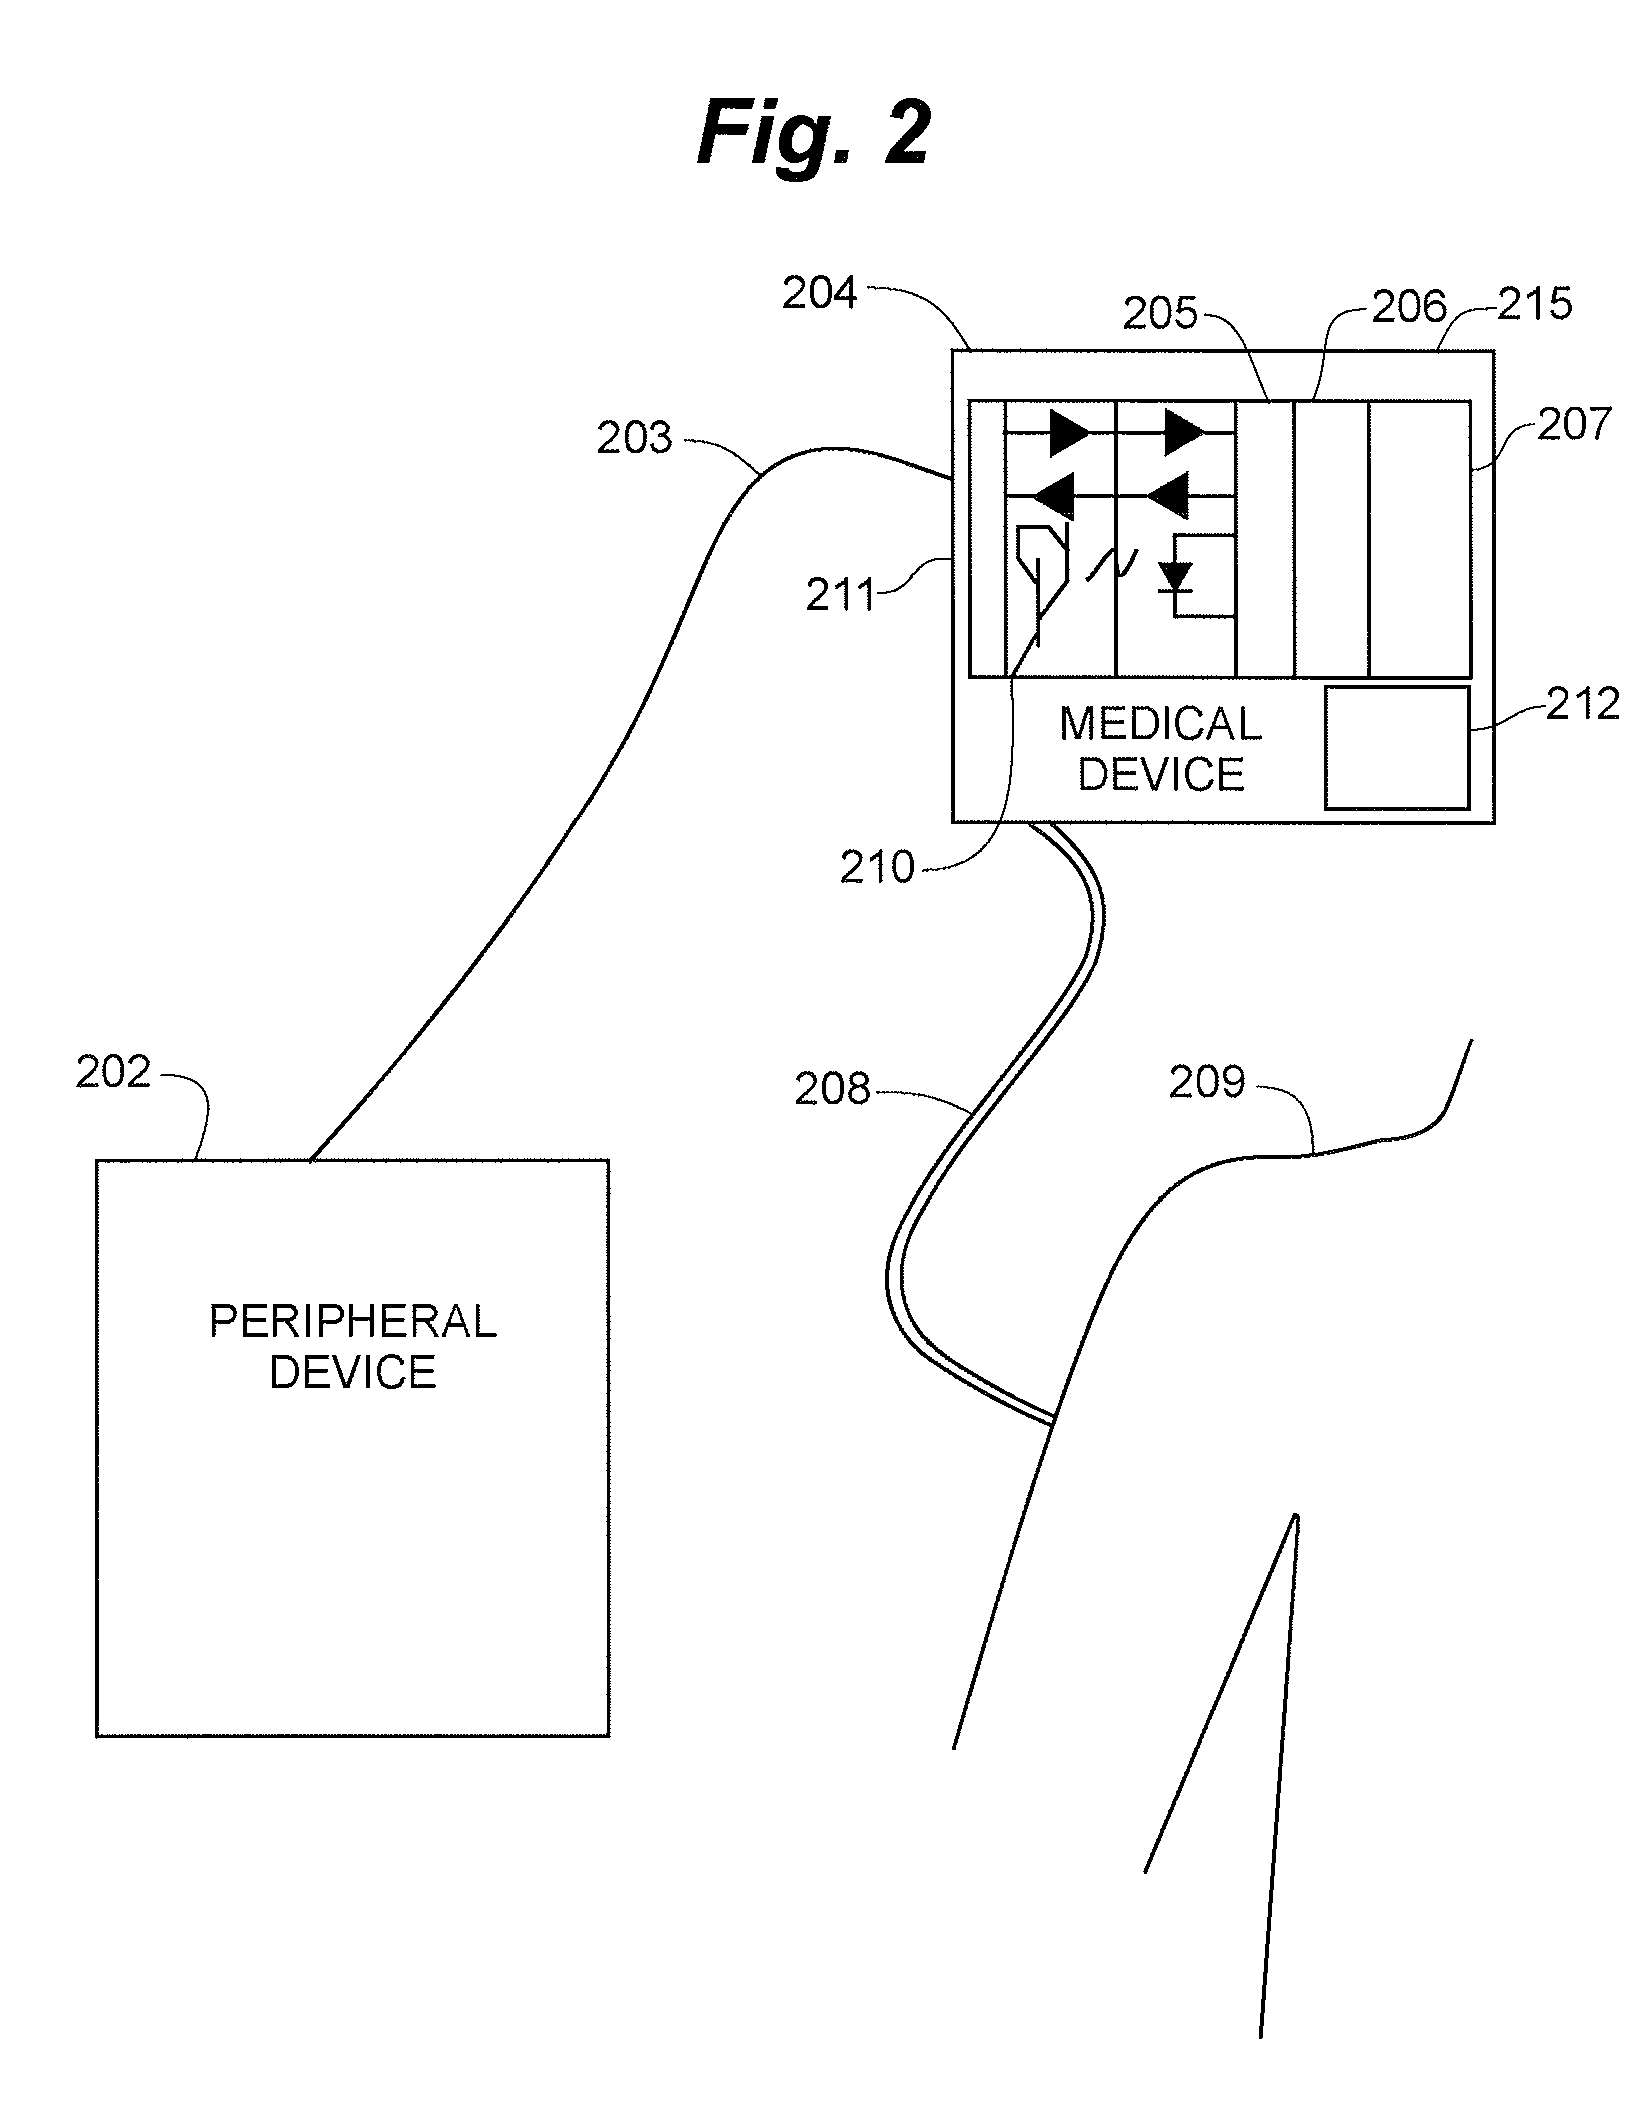 Ambulatory medical device with electrical isolation from connected peripheral device